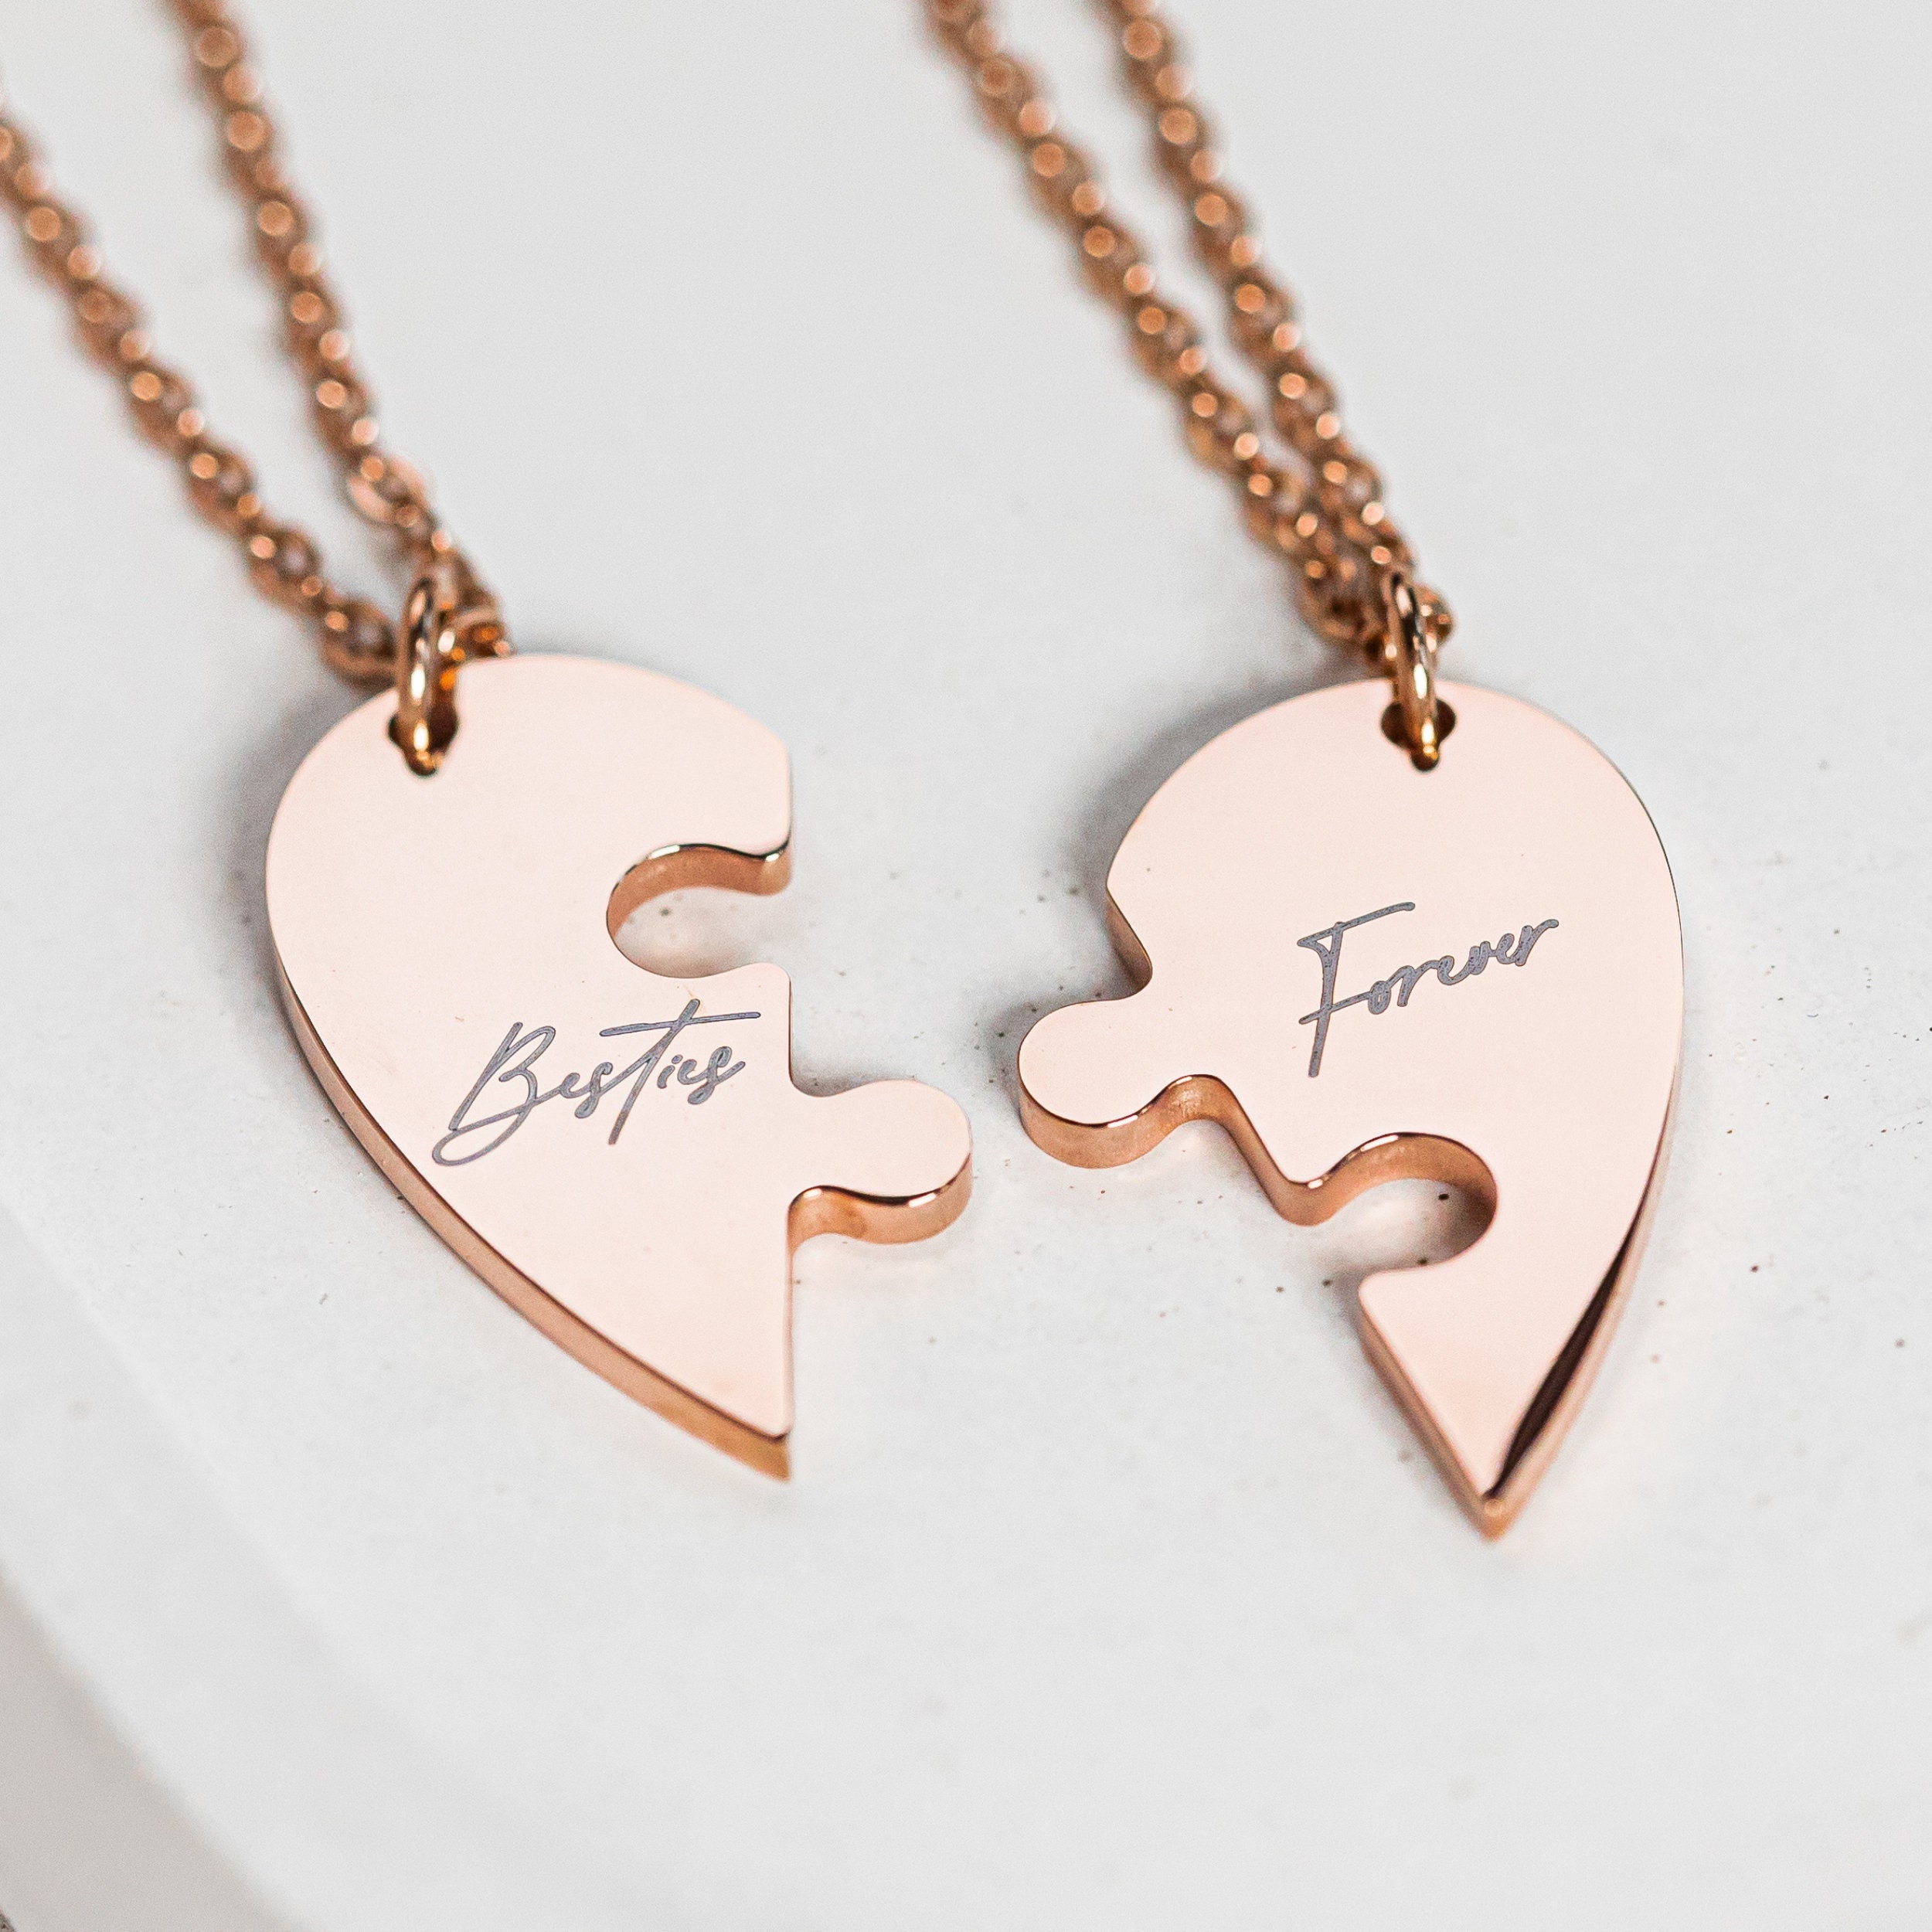 Cross Border New Headset Couple Necklace Magnet Necklaces Personalized  Creative Valentine's Day jewelry Gifts for Men